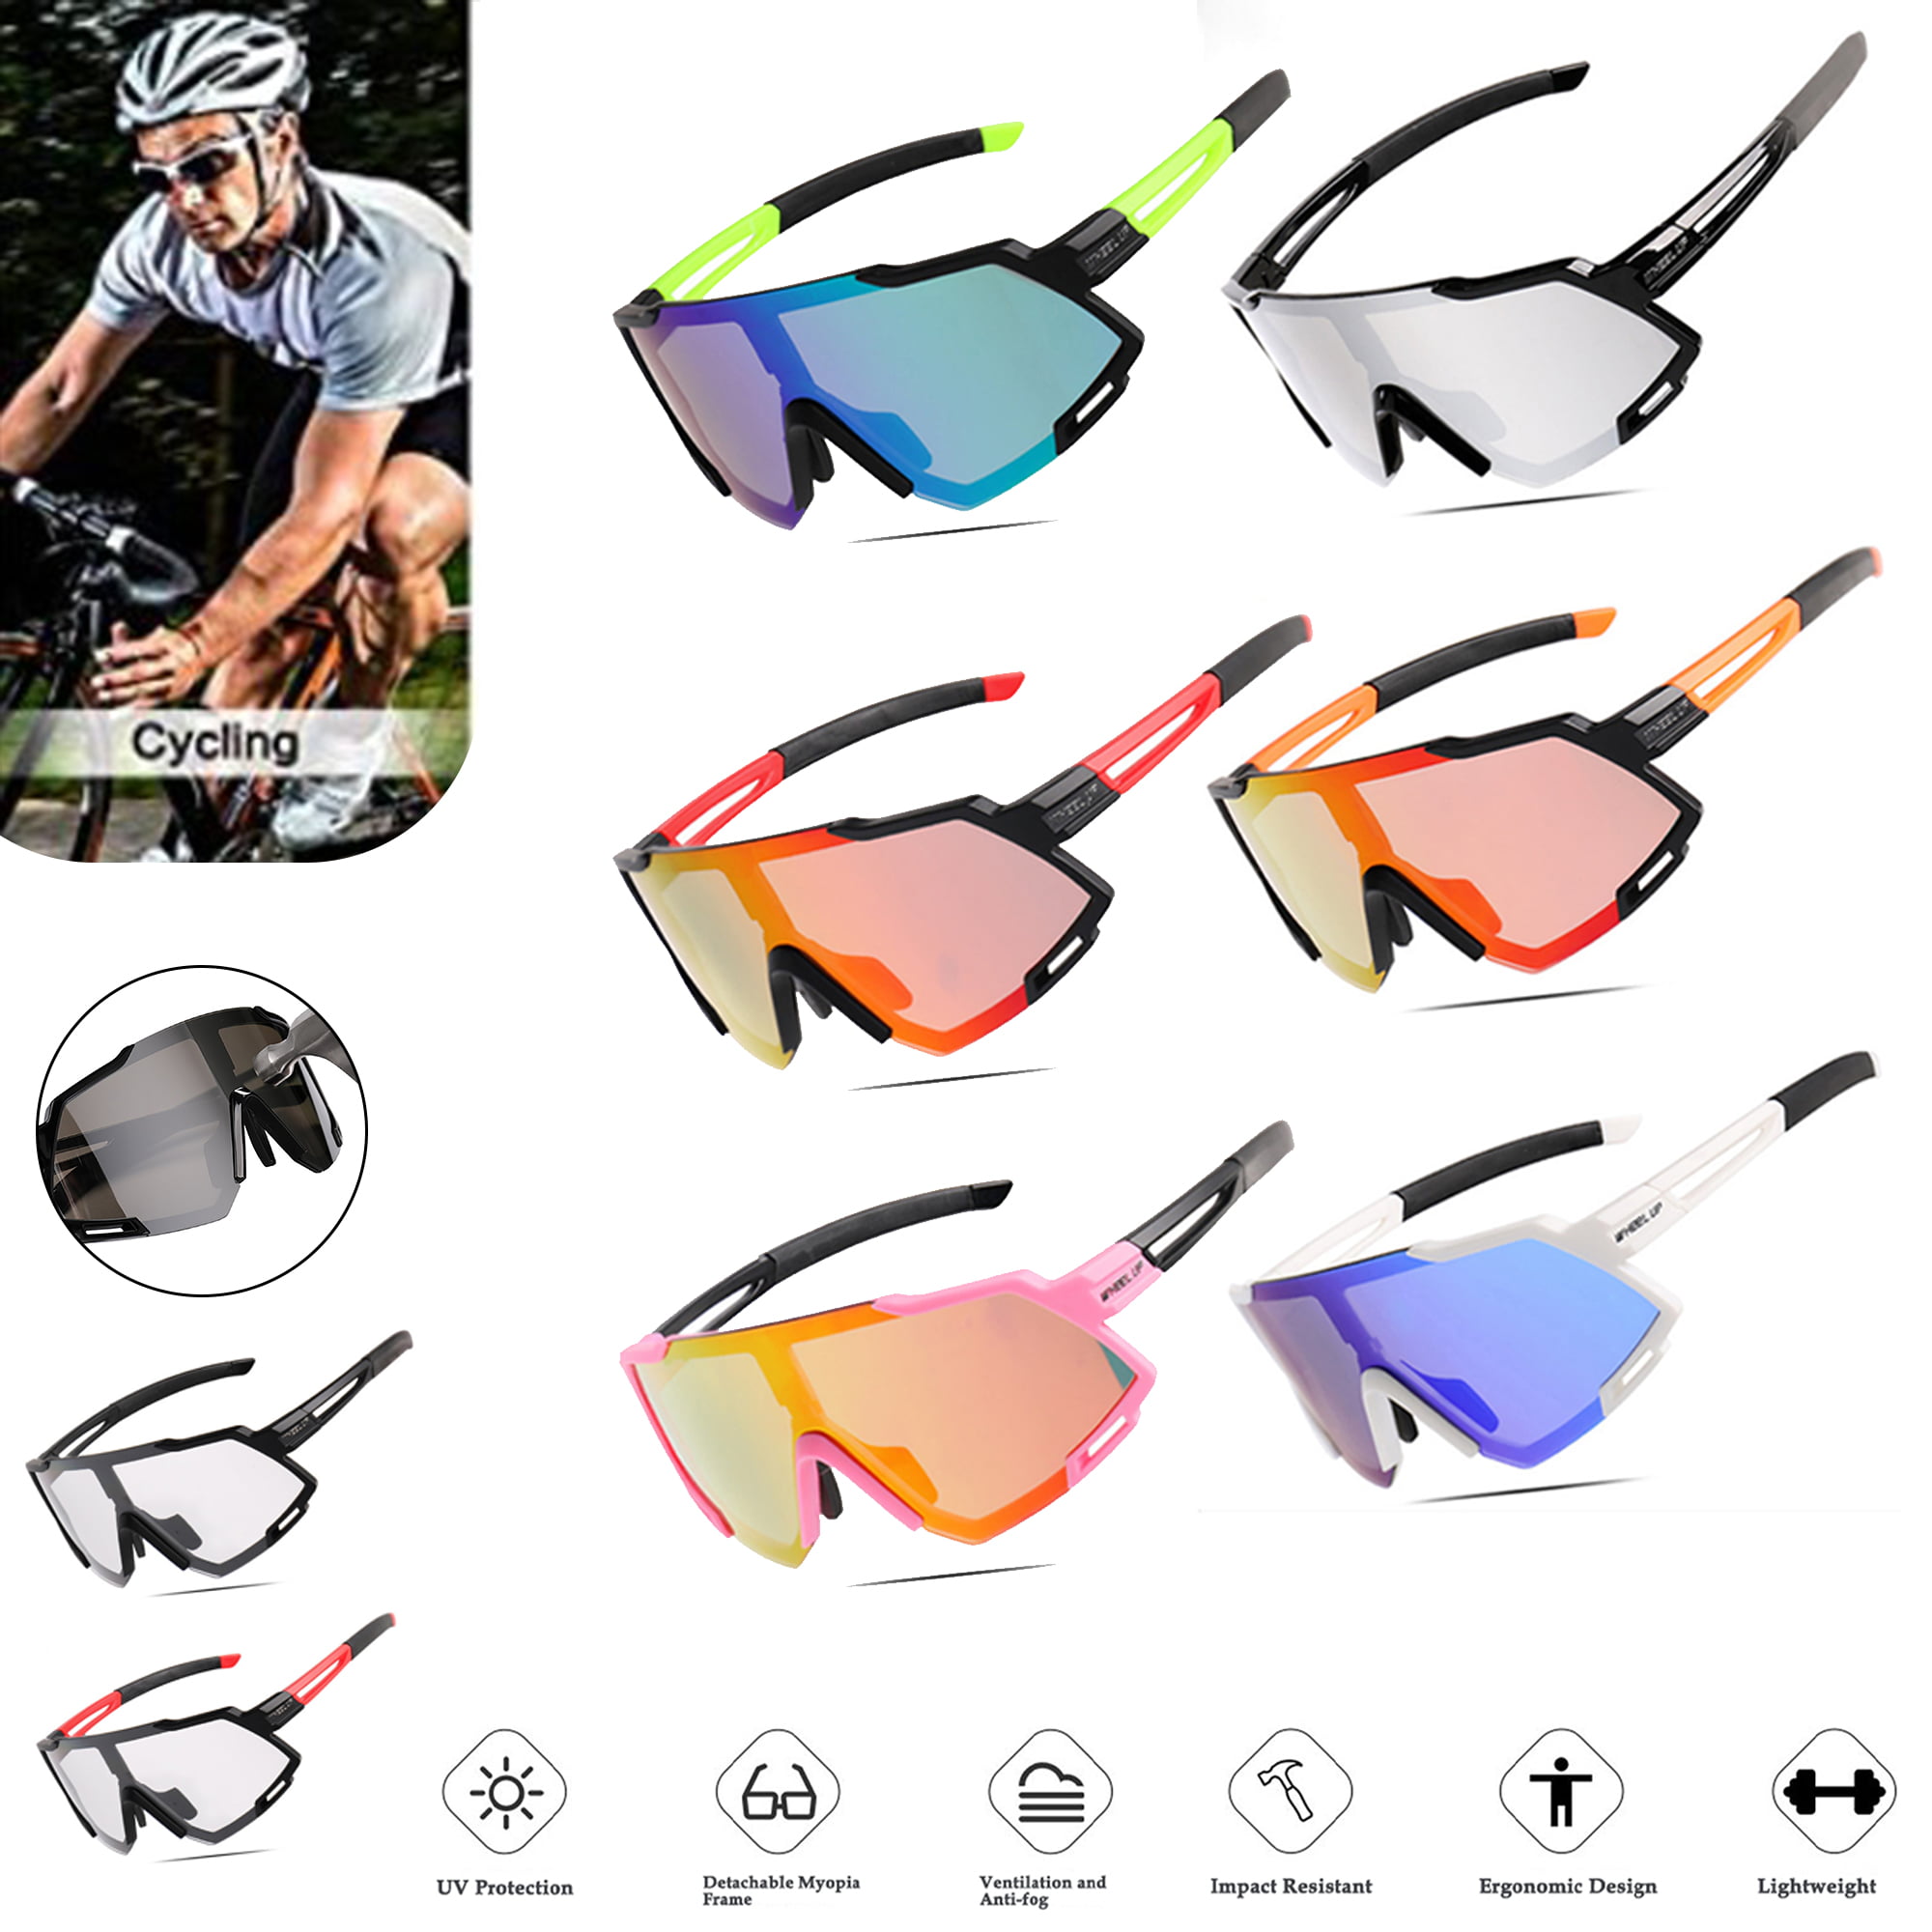 1x Sport Sunglasses Adult Glasses for Bicycles MTB Running Bike Cycling Goggles 